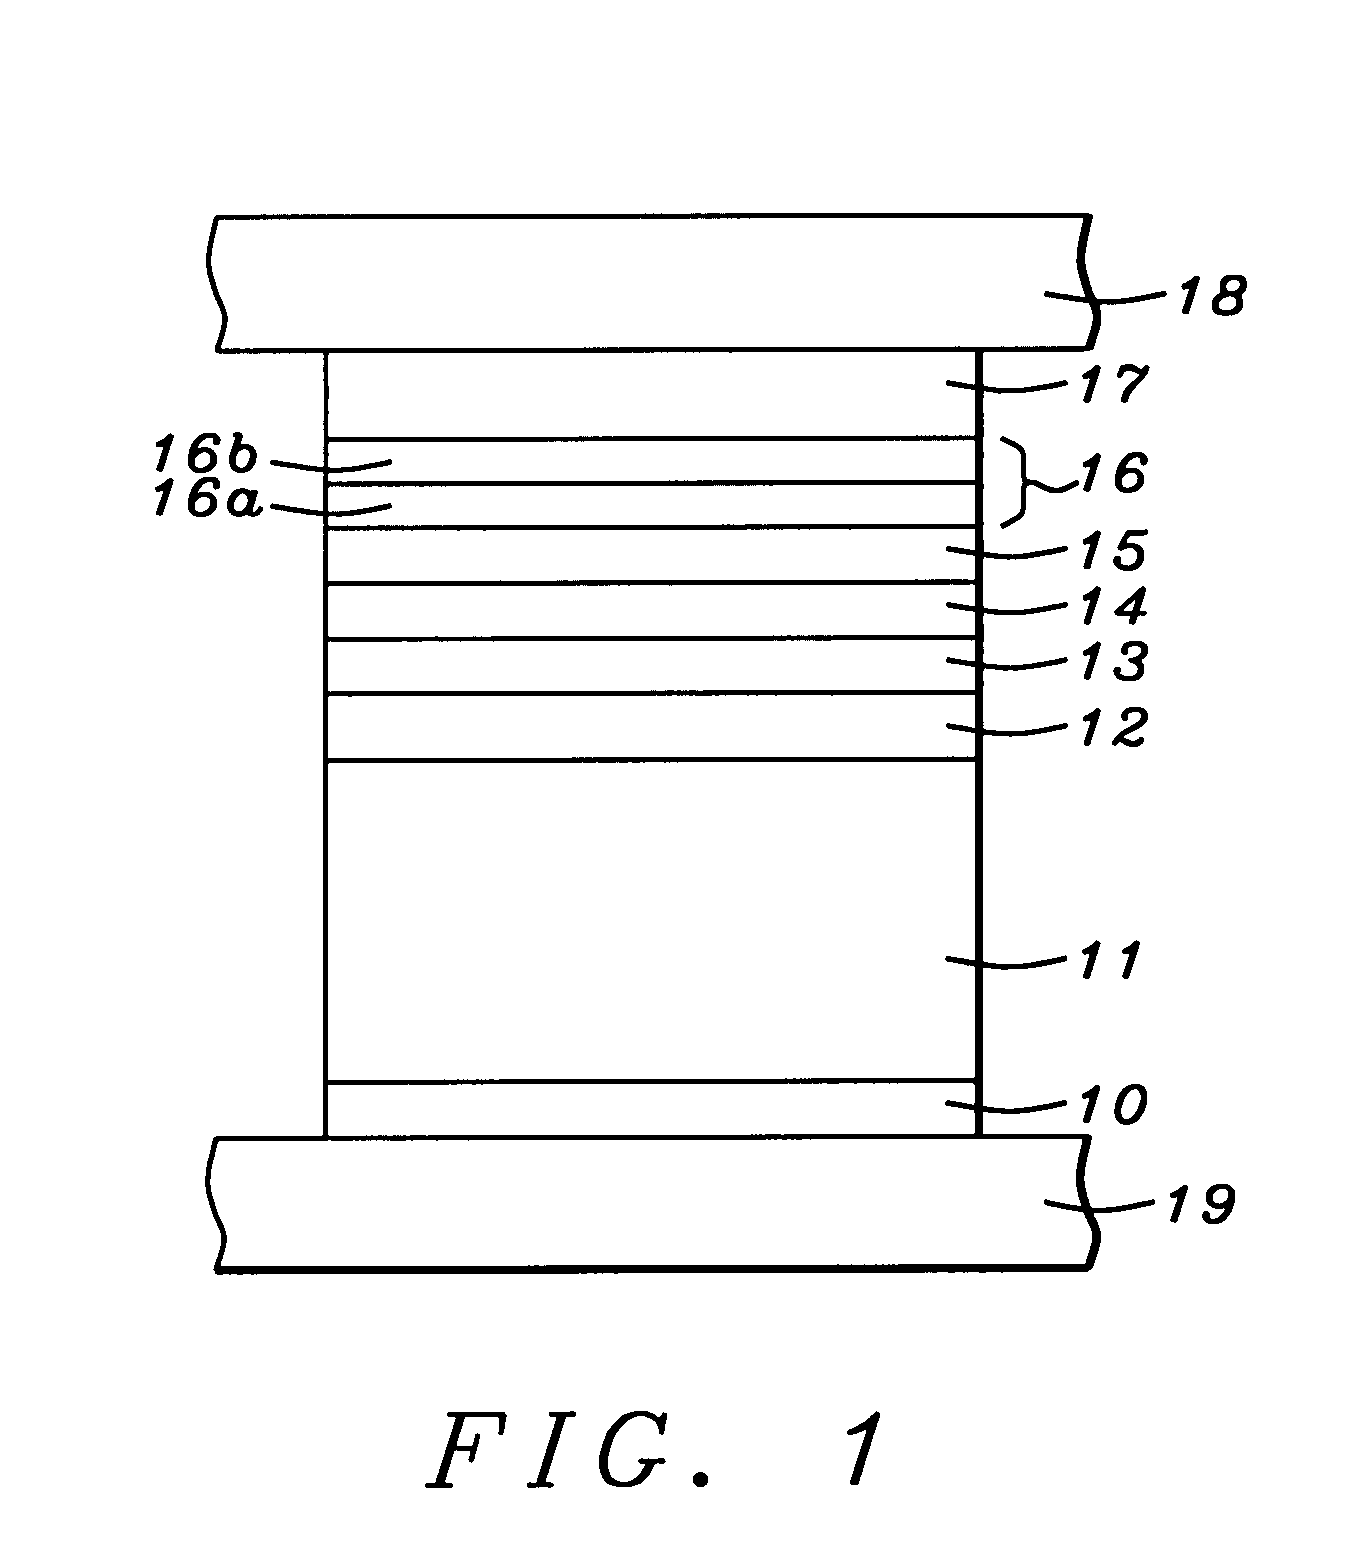 Amorphous layers in a magnetic tunnel junction device